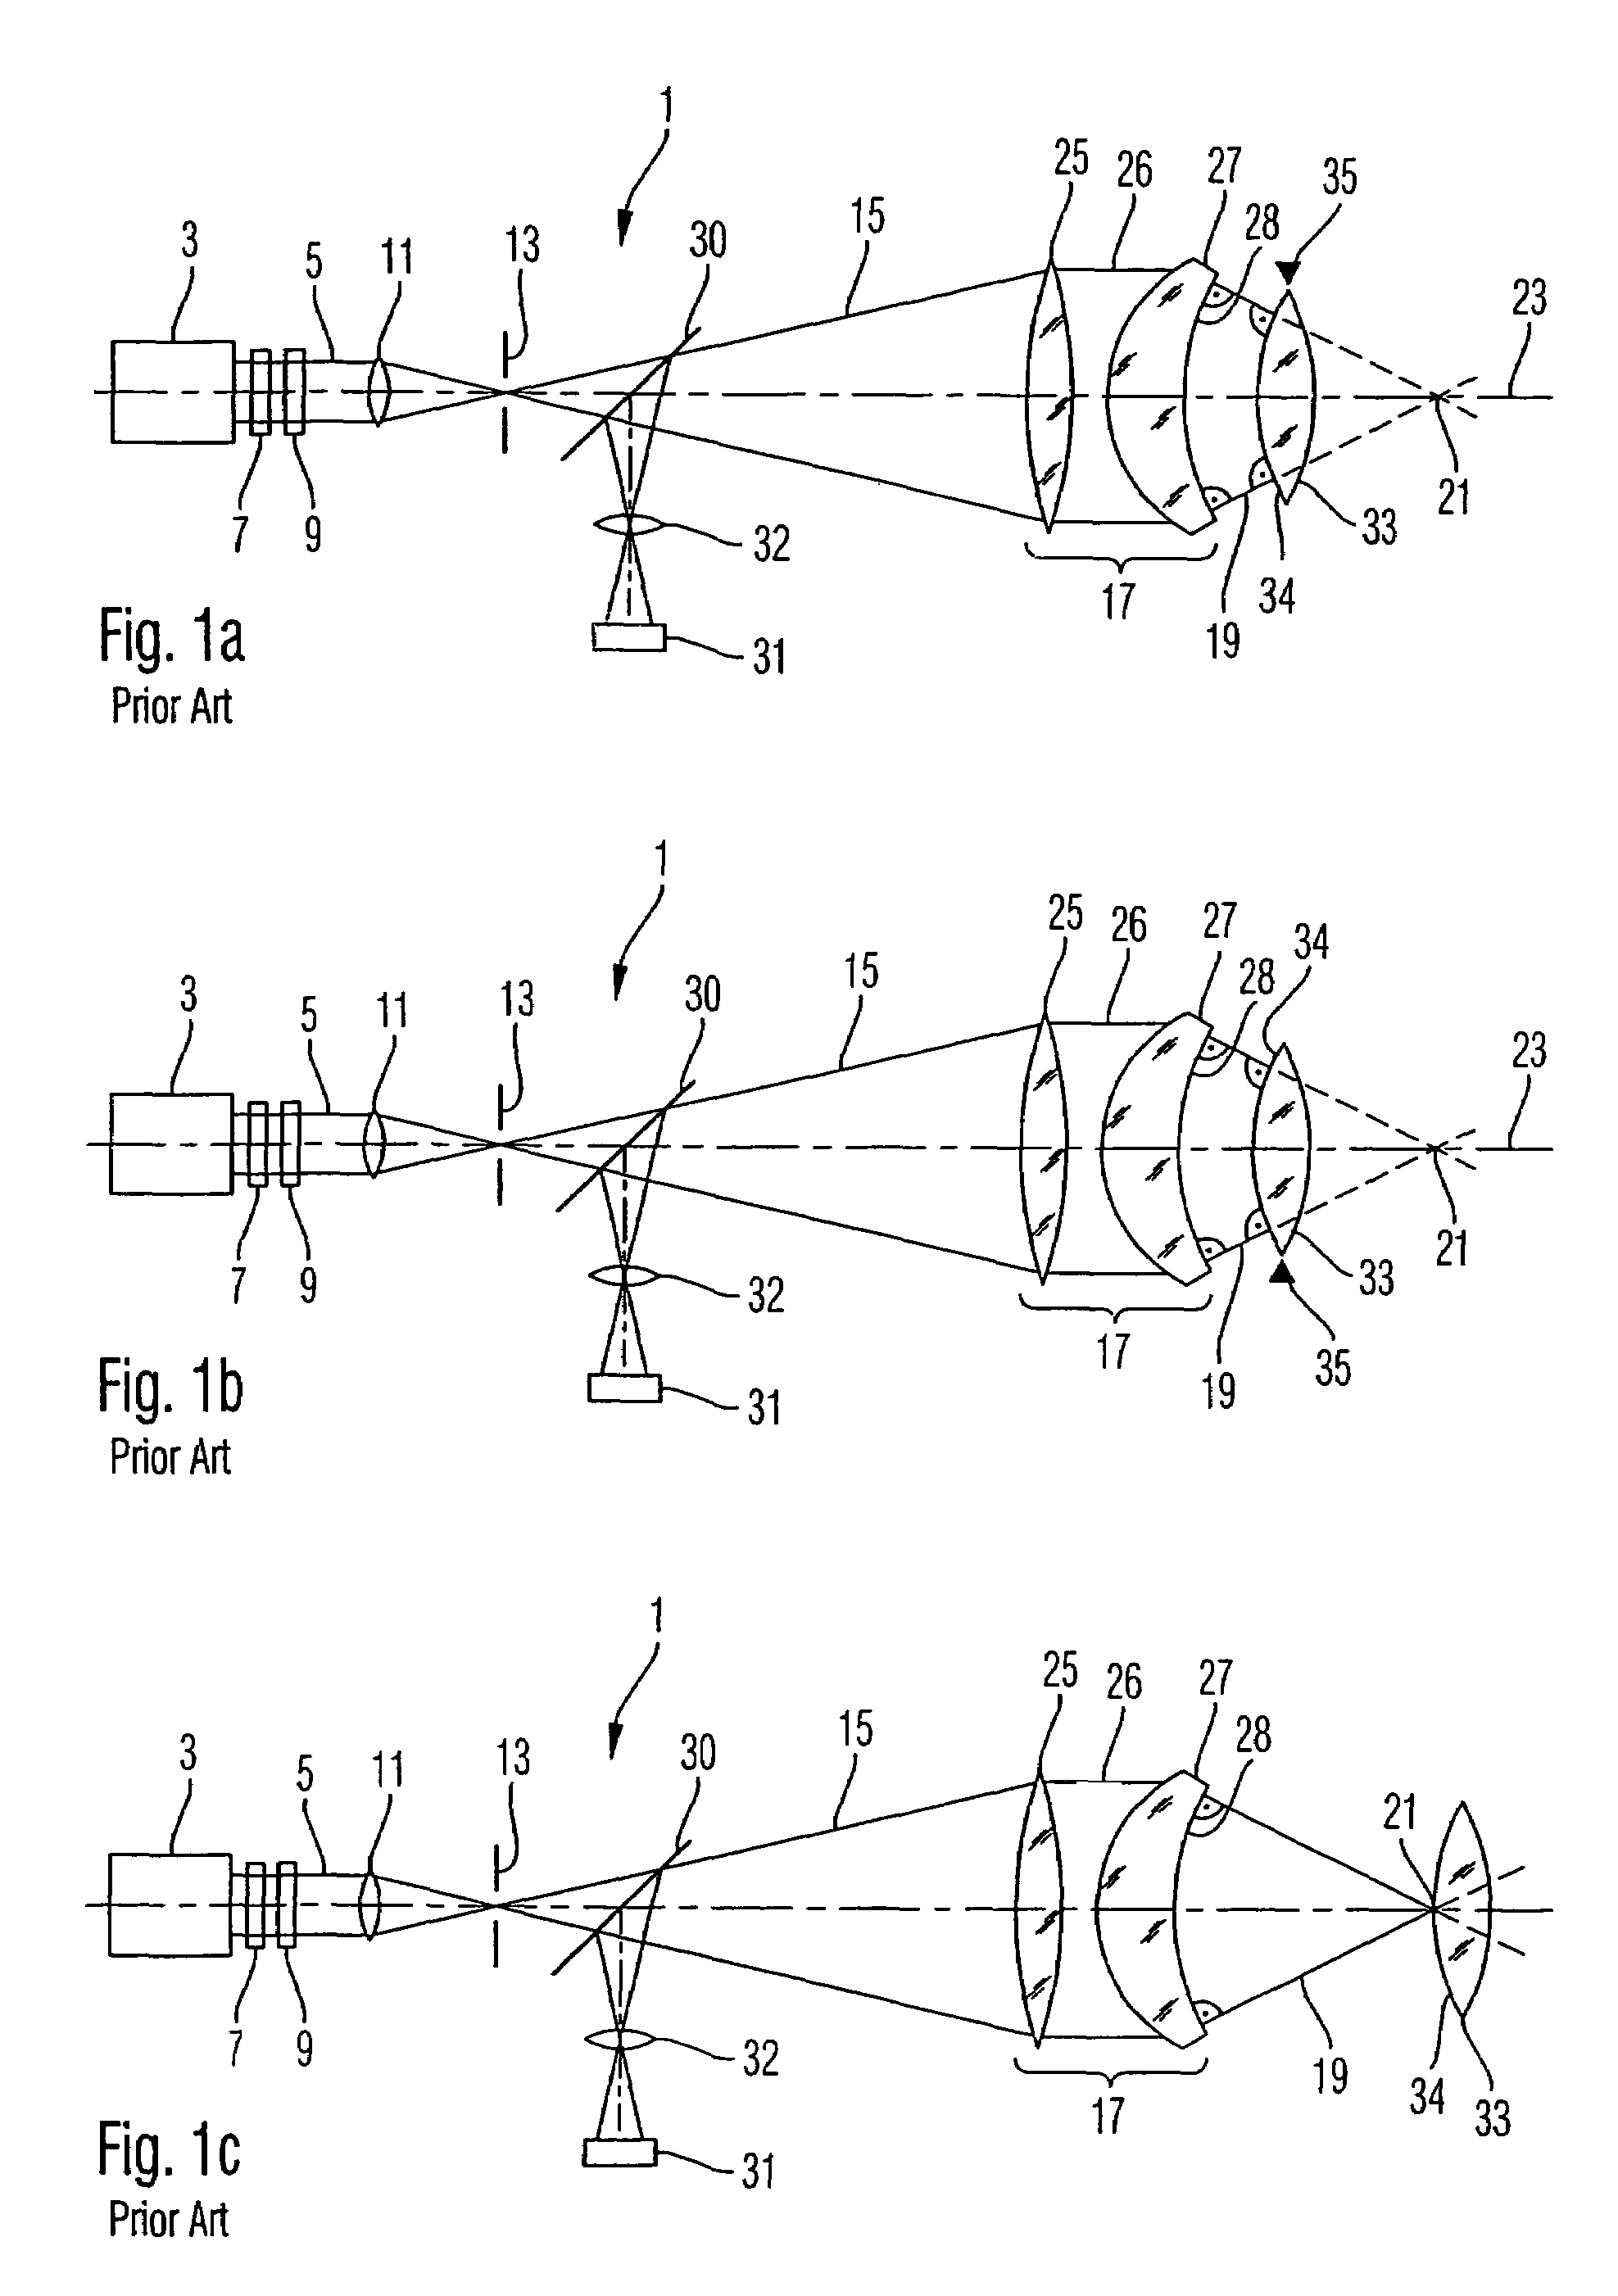 Interferometer apparatus and method of processing a substrate having an optical surface